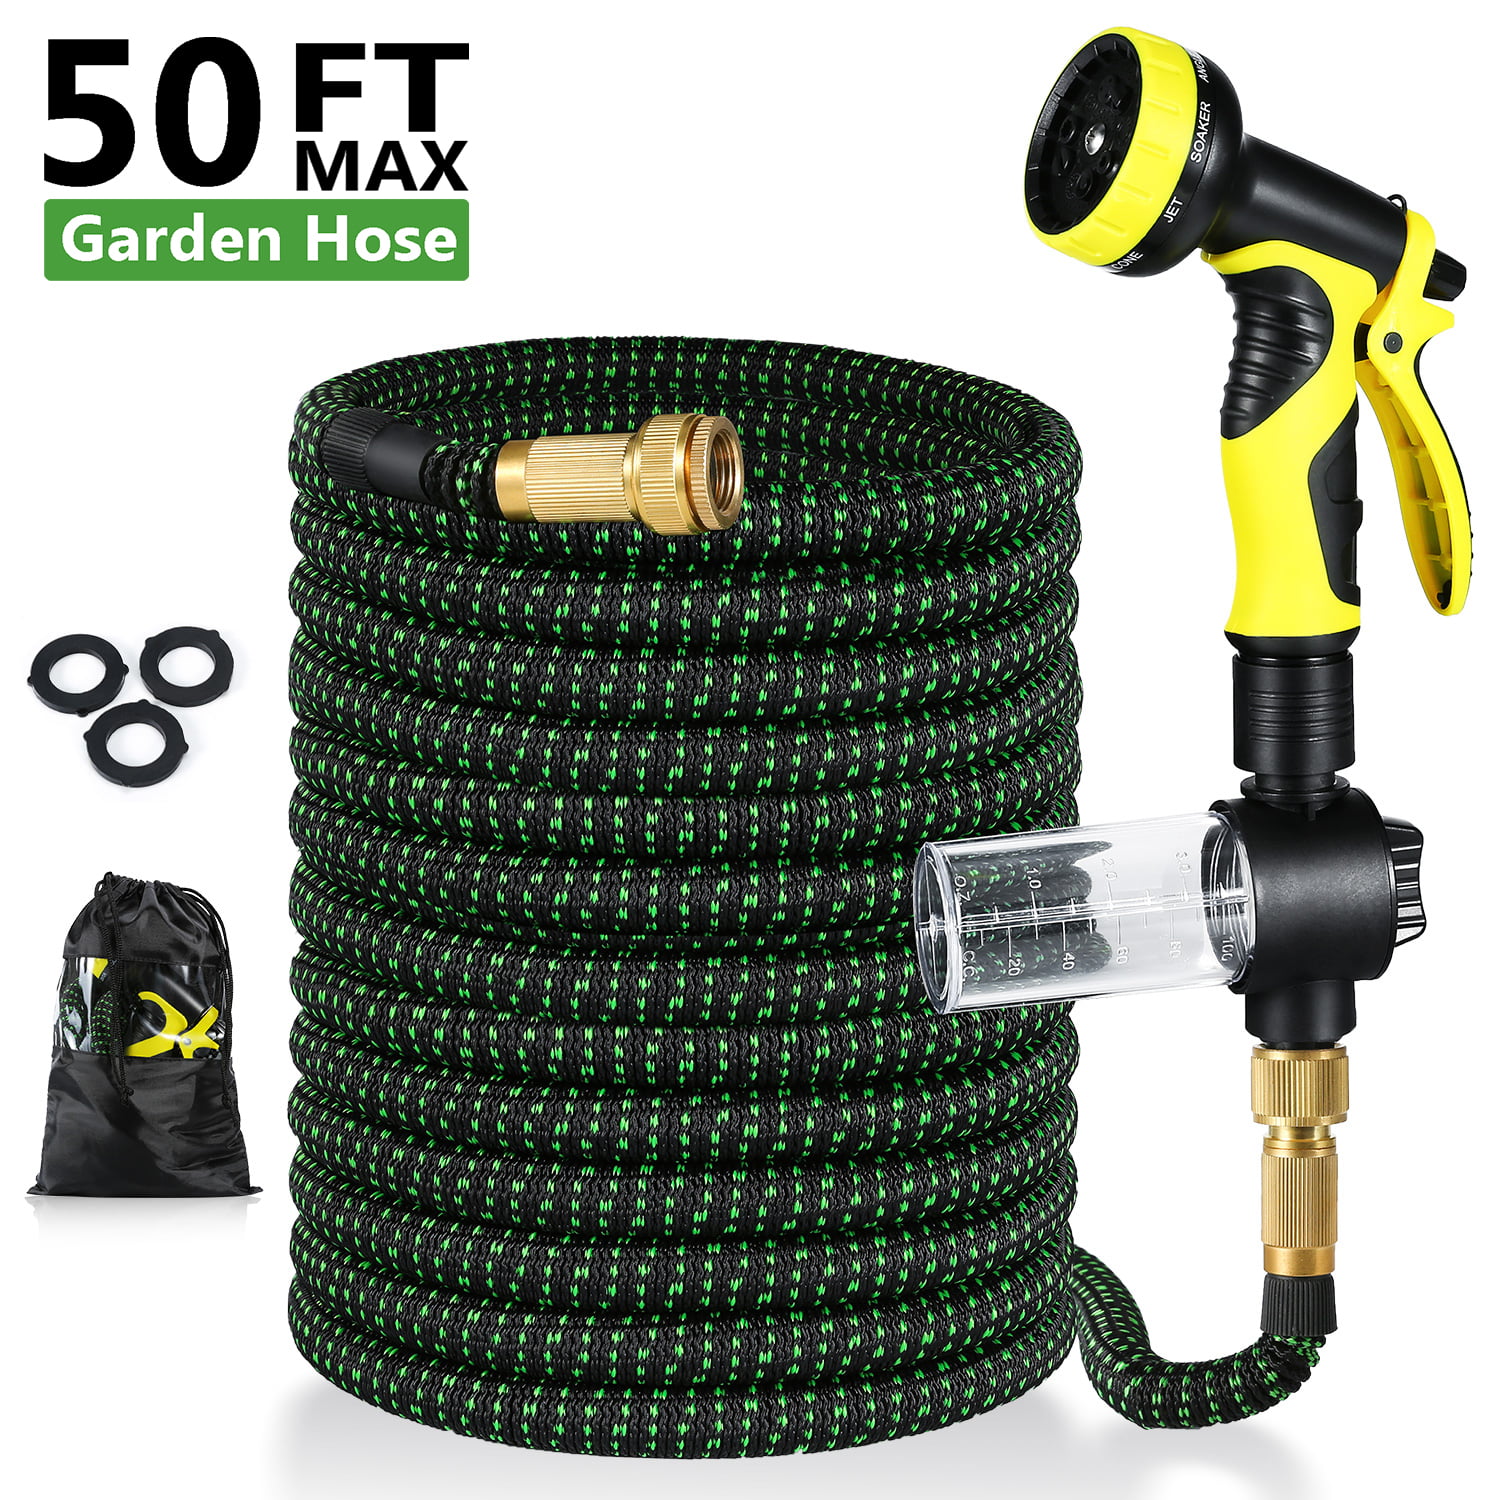 8 FlexiHose Upgraded Expandable 50 FT Garden Hose 3/4" Solid Extra Strength 